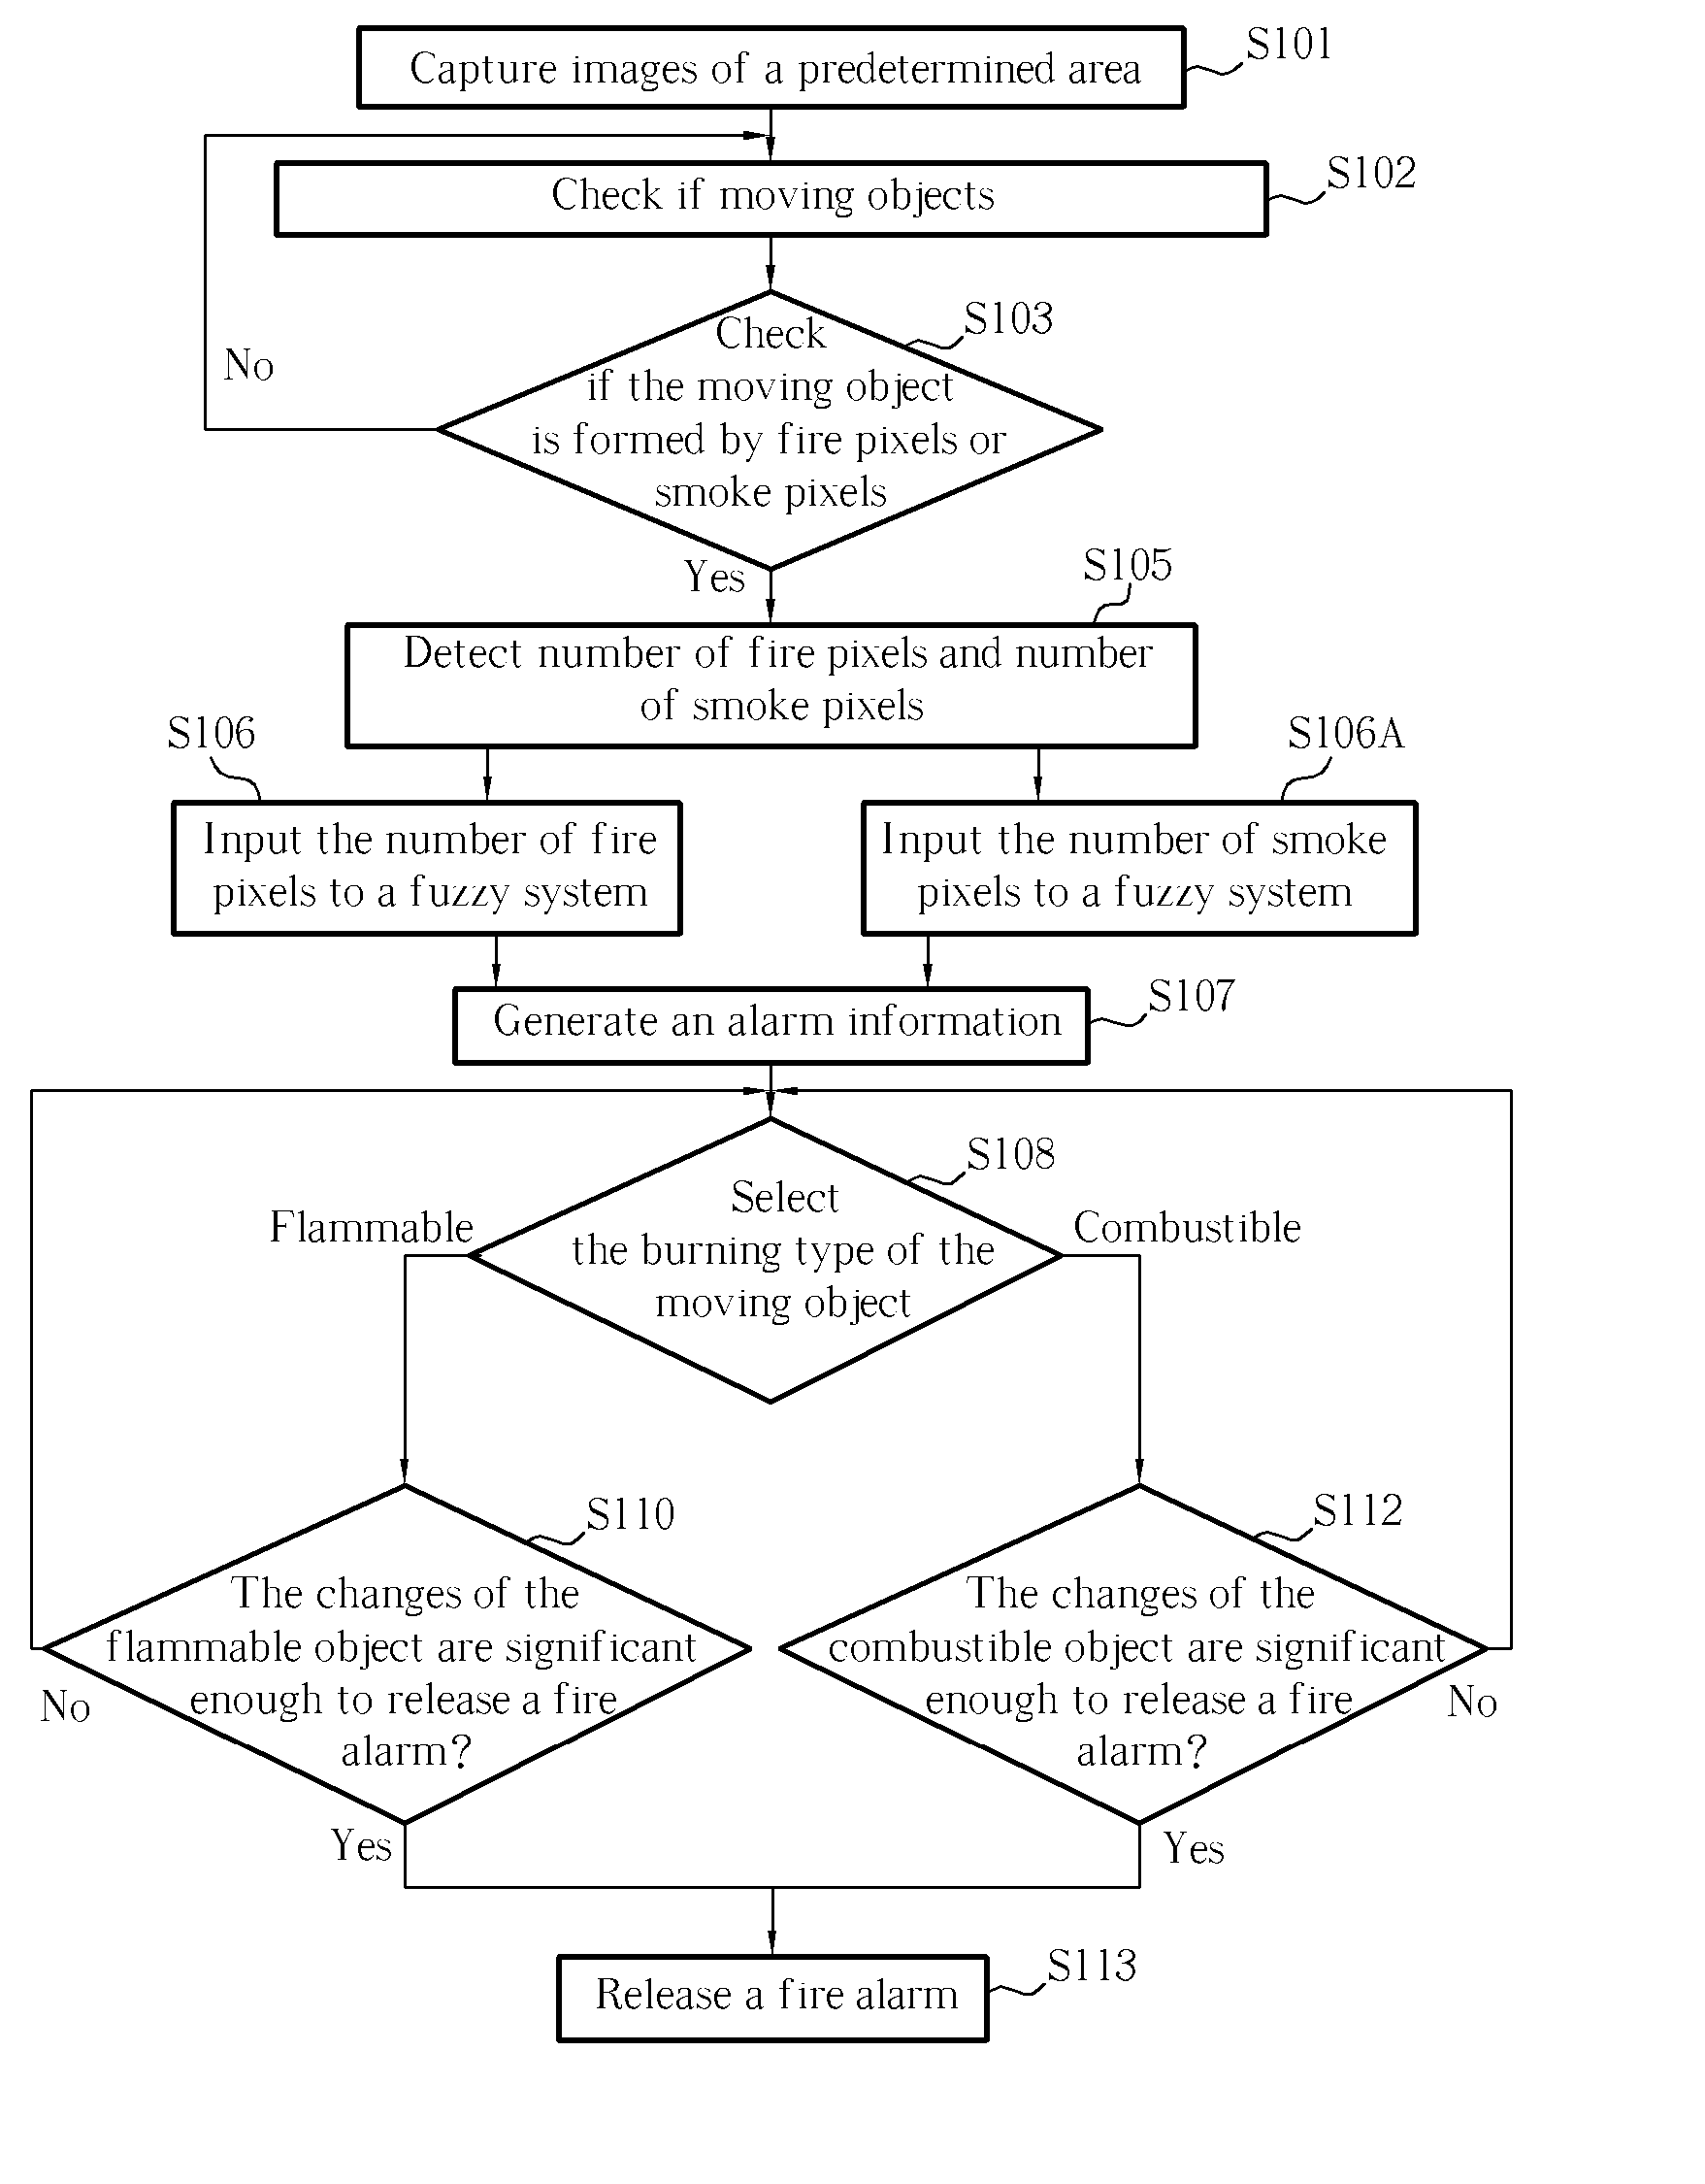 Fire detection and smoke detection method and system based on image processing